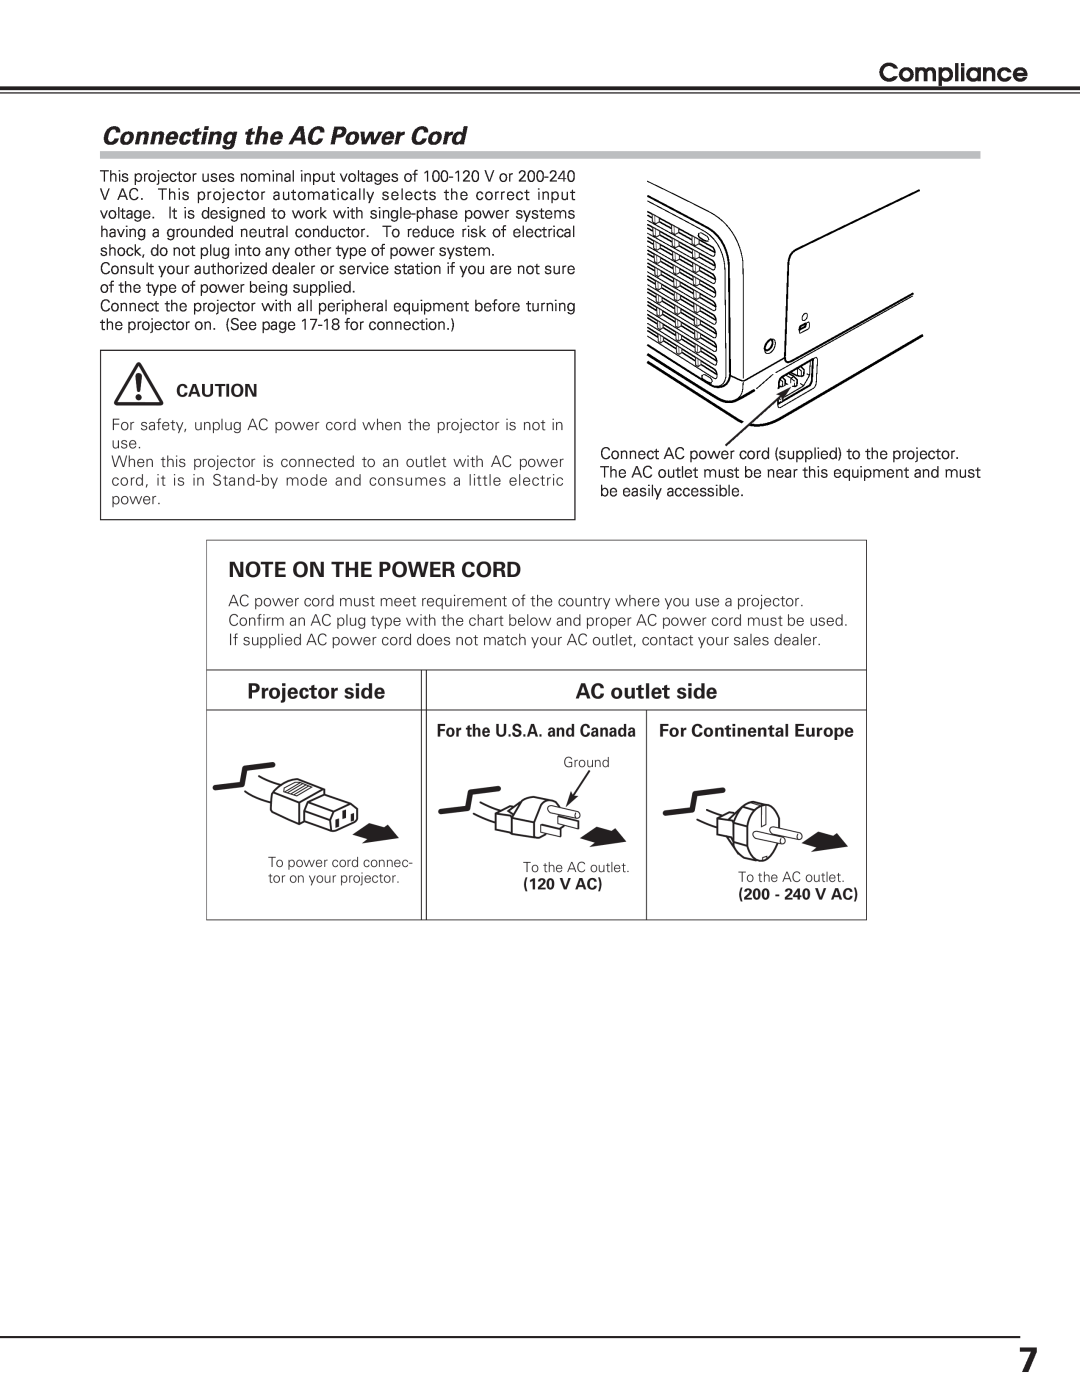 Eiki LC-XE10 instruction manual Compliance, Connecting the AC Power Cord, For the U.S.A. and Canada, V Ac, 200 - 240 V AC 